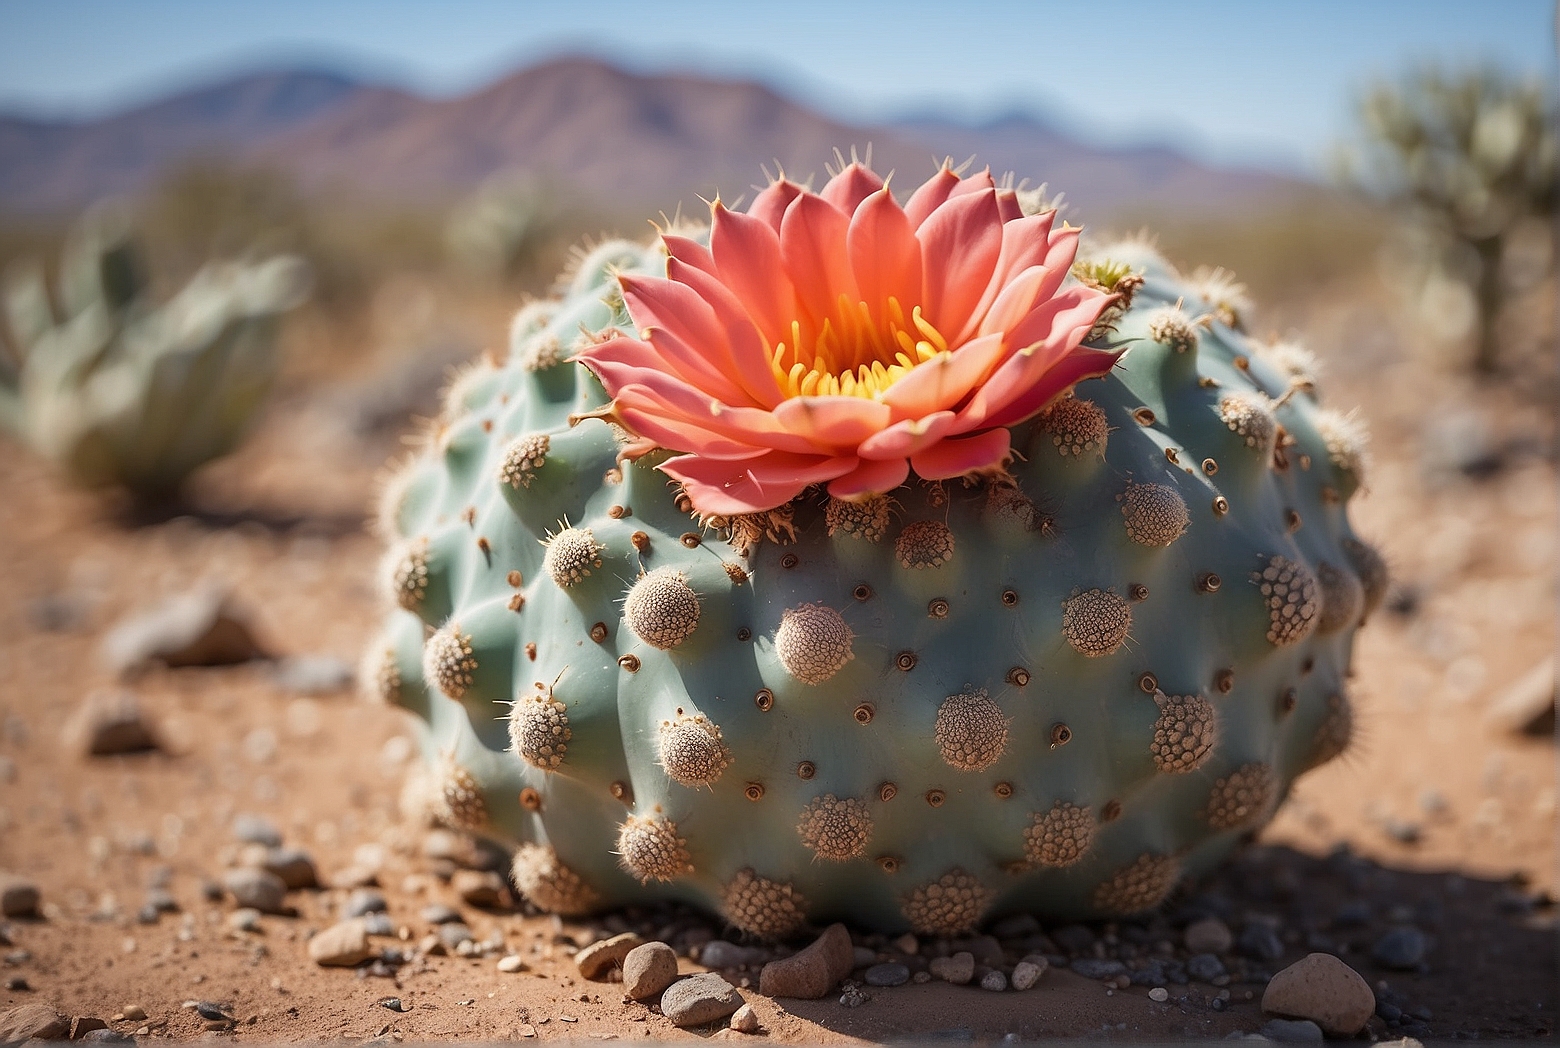 Can Dogs Safely Eat the Peyote Cactus?